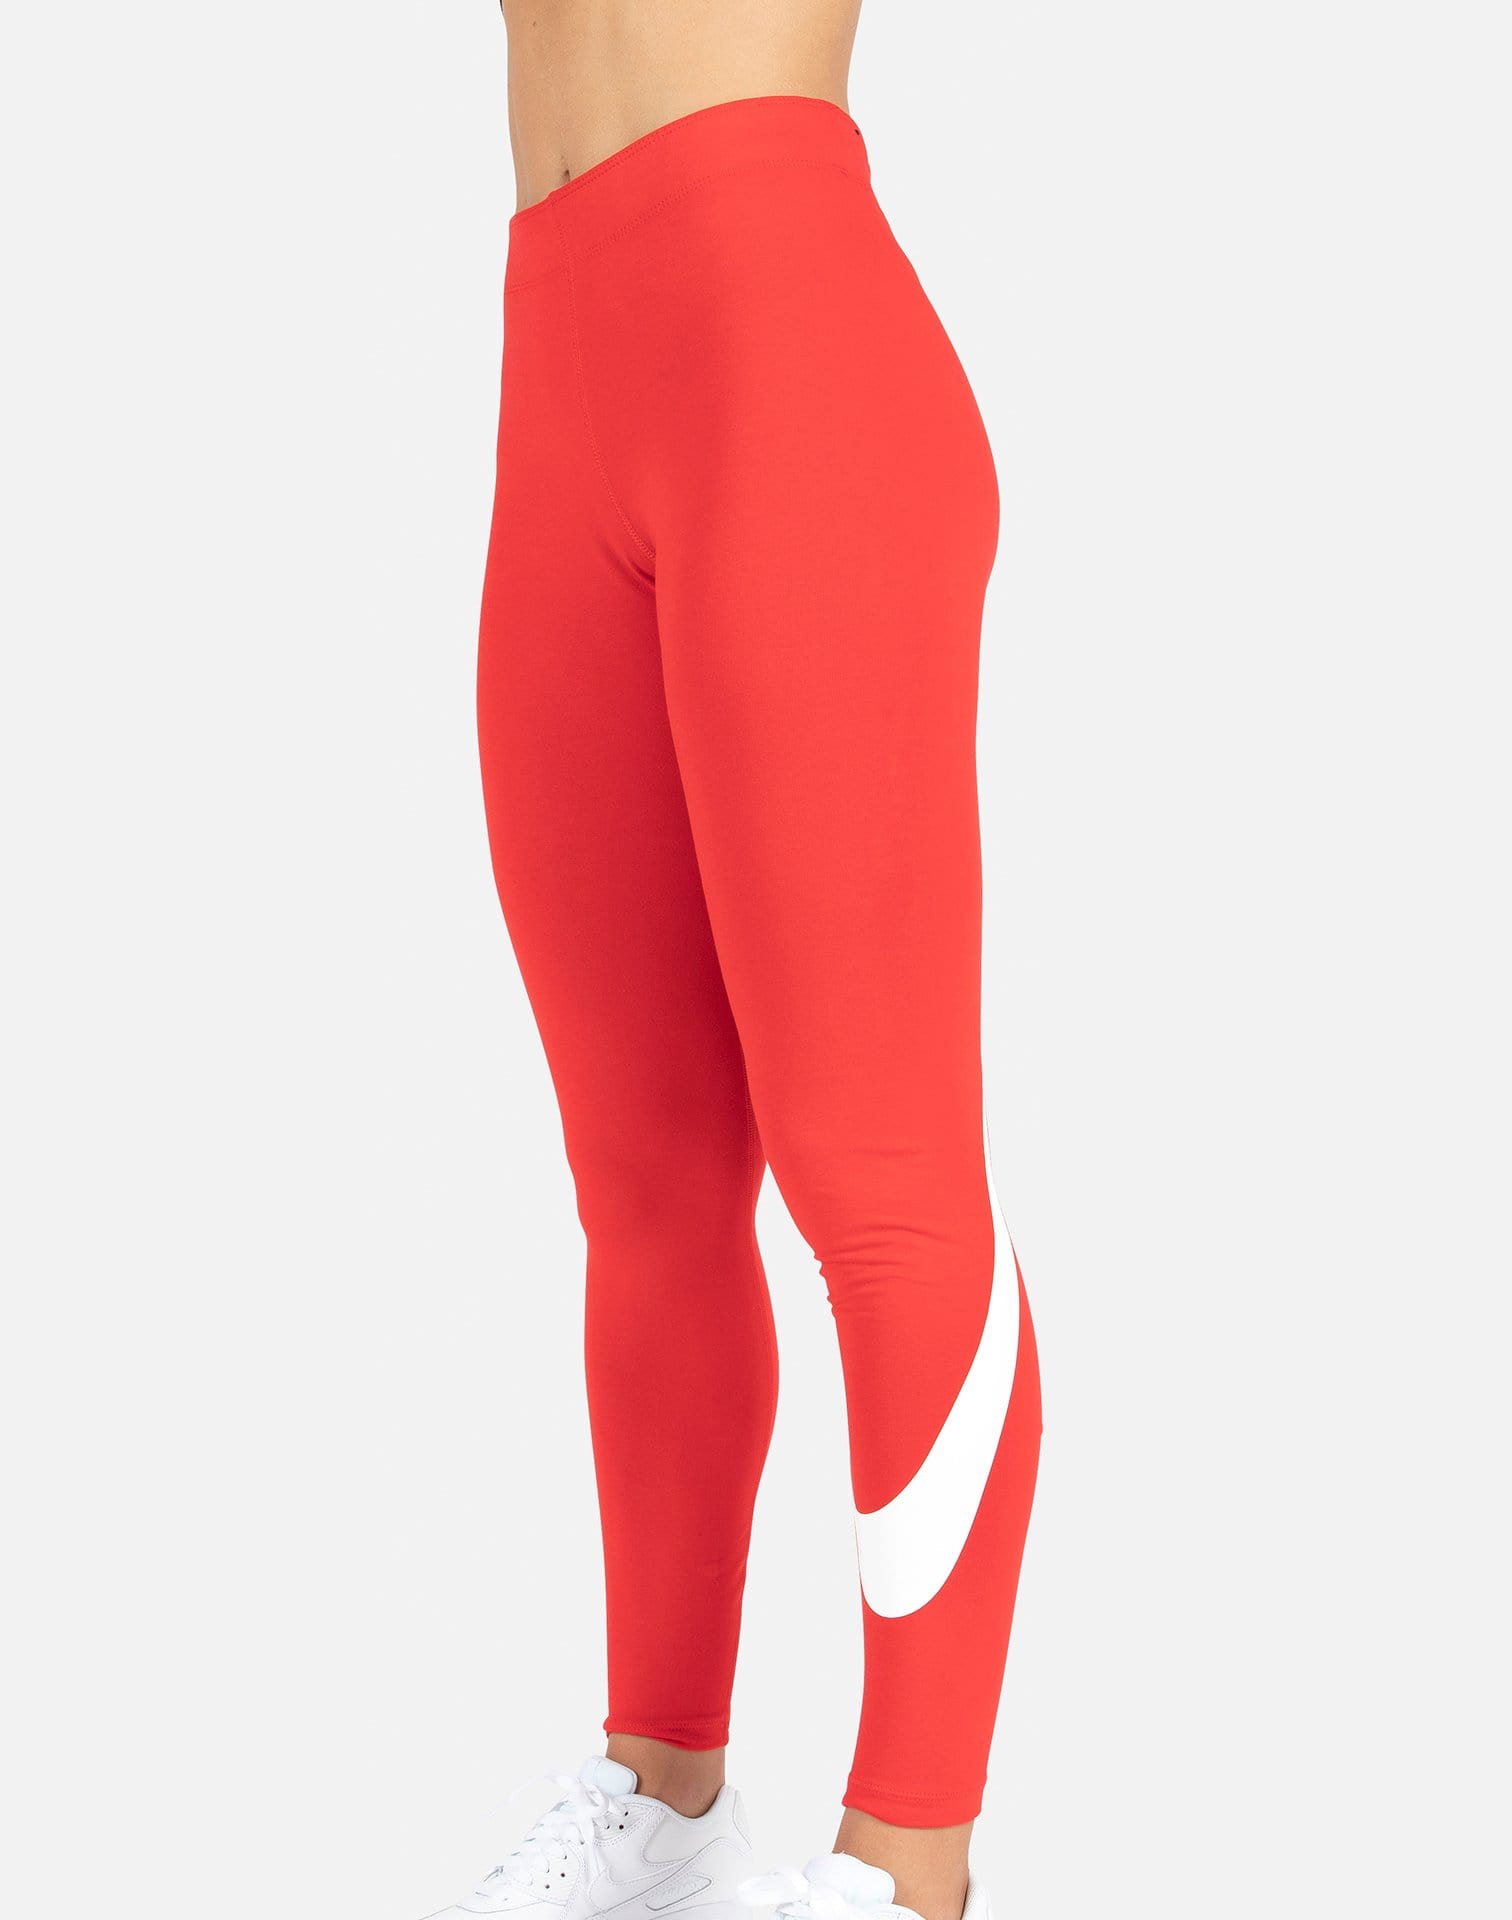 nike red tights